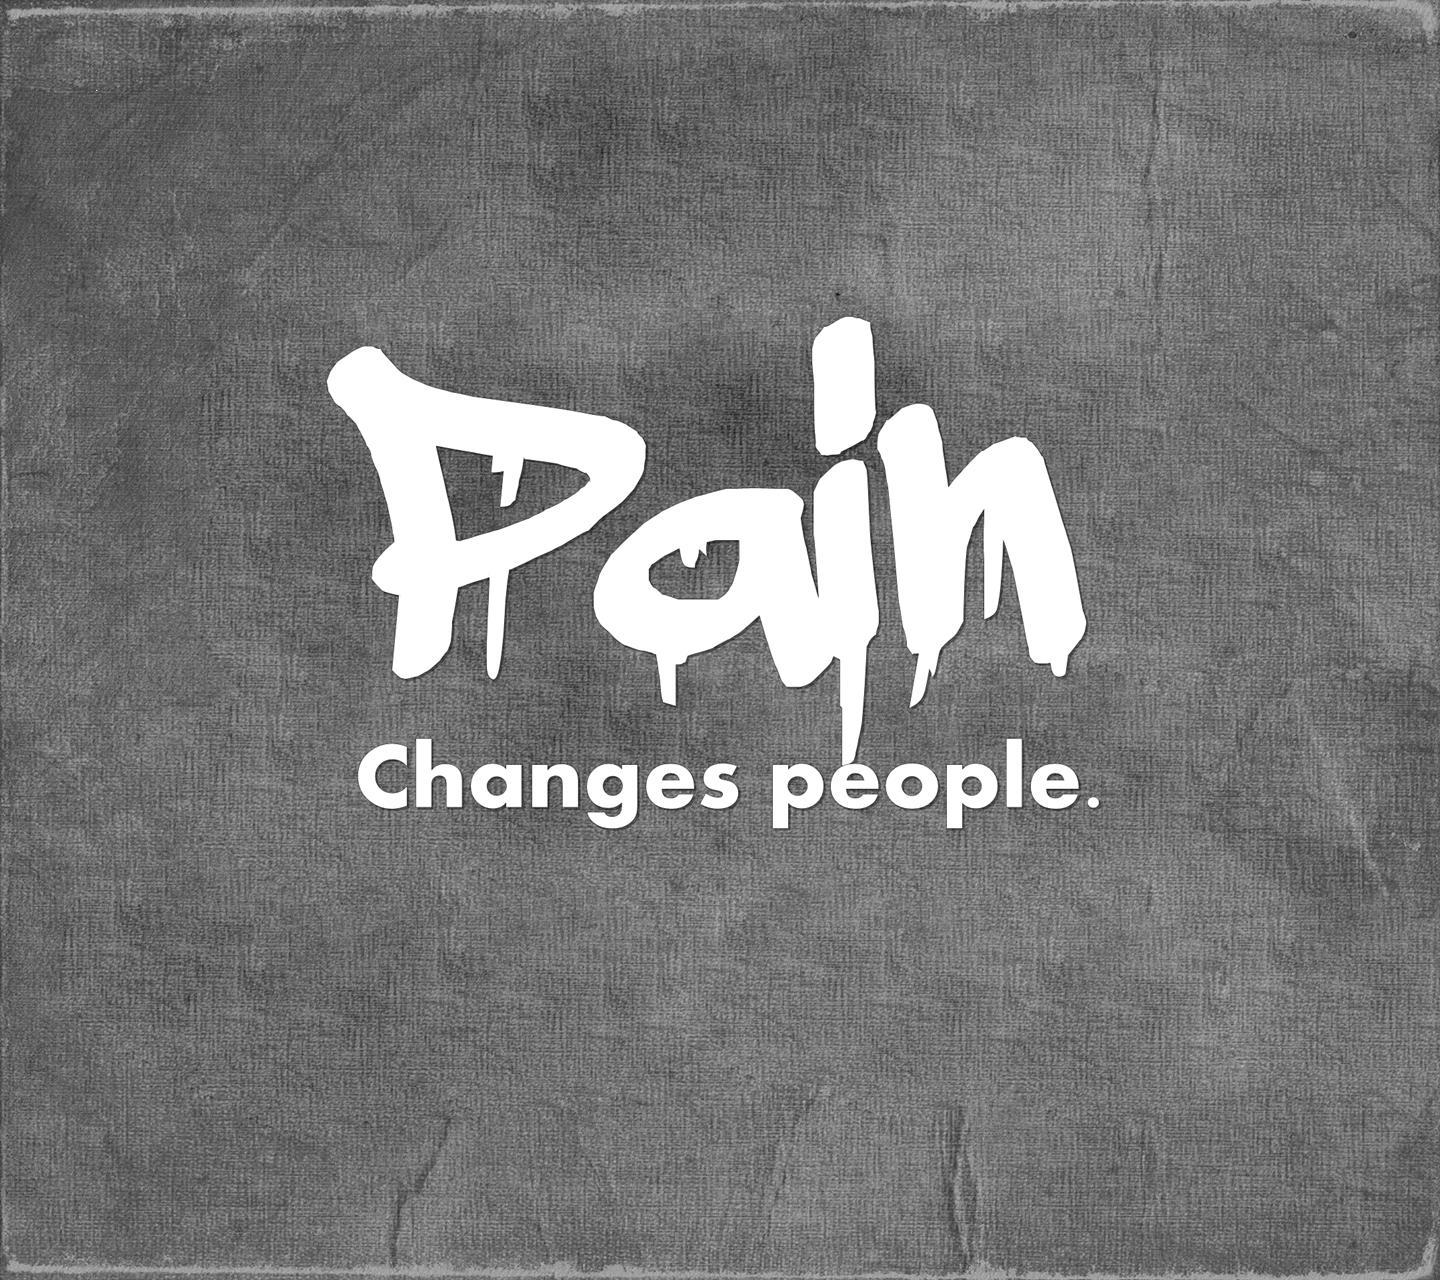 Download Pain change people quote pic quote wallpaper